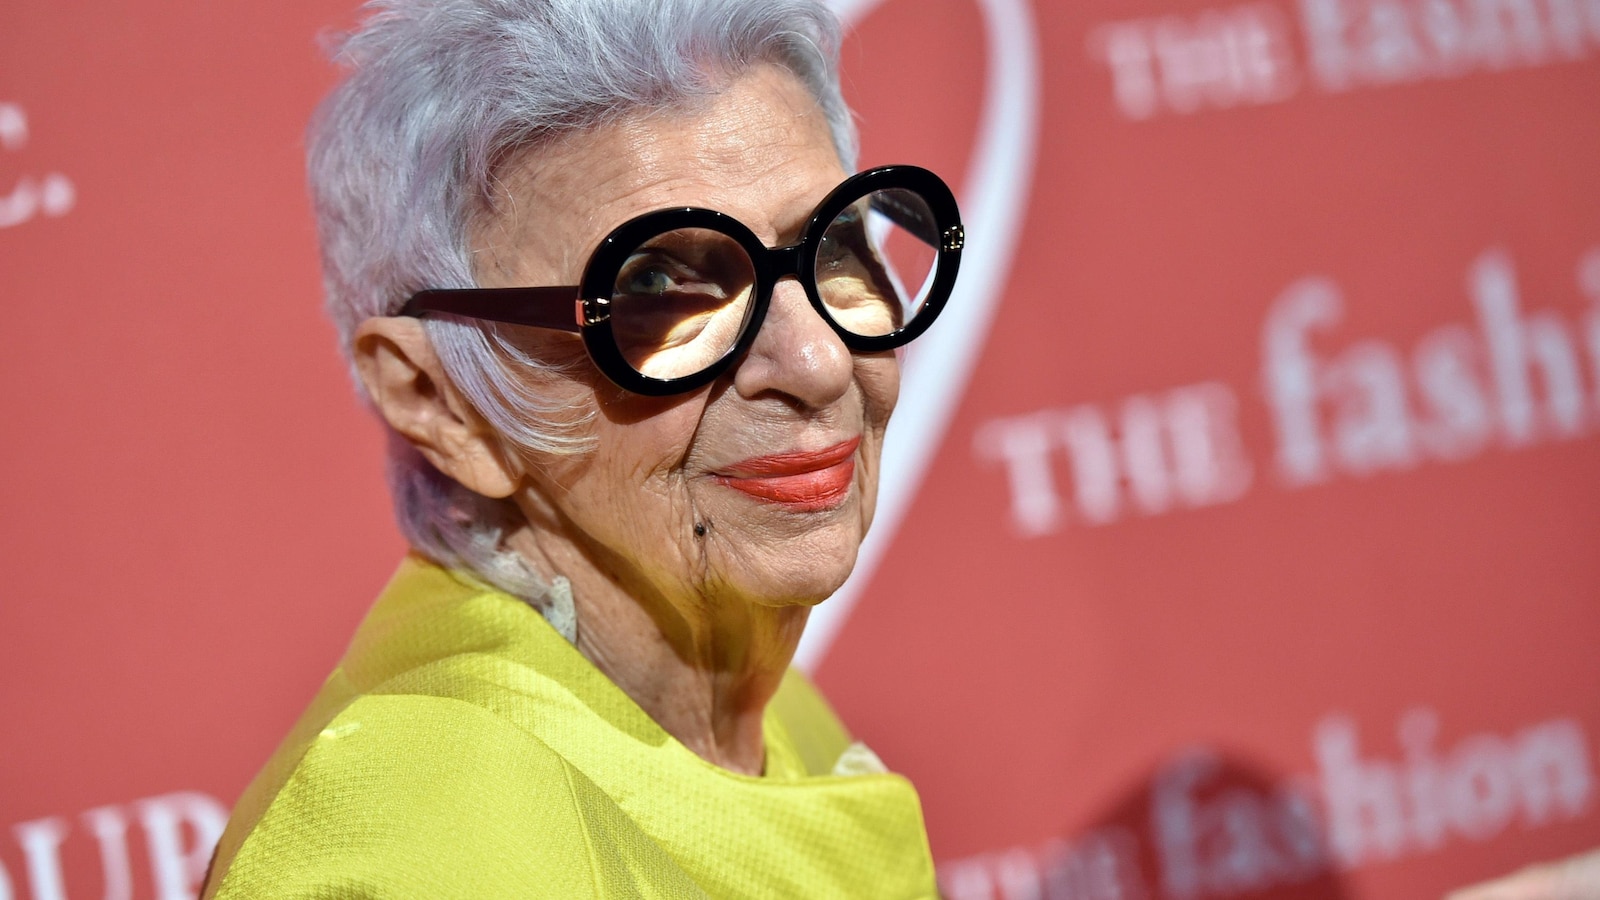 Iris Apfel, trend icon identified for her eye-catching fashion, dies at 102